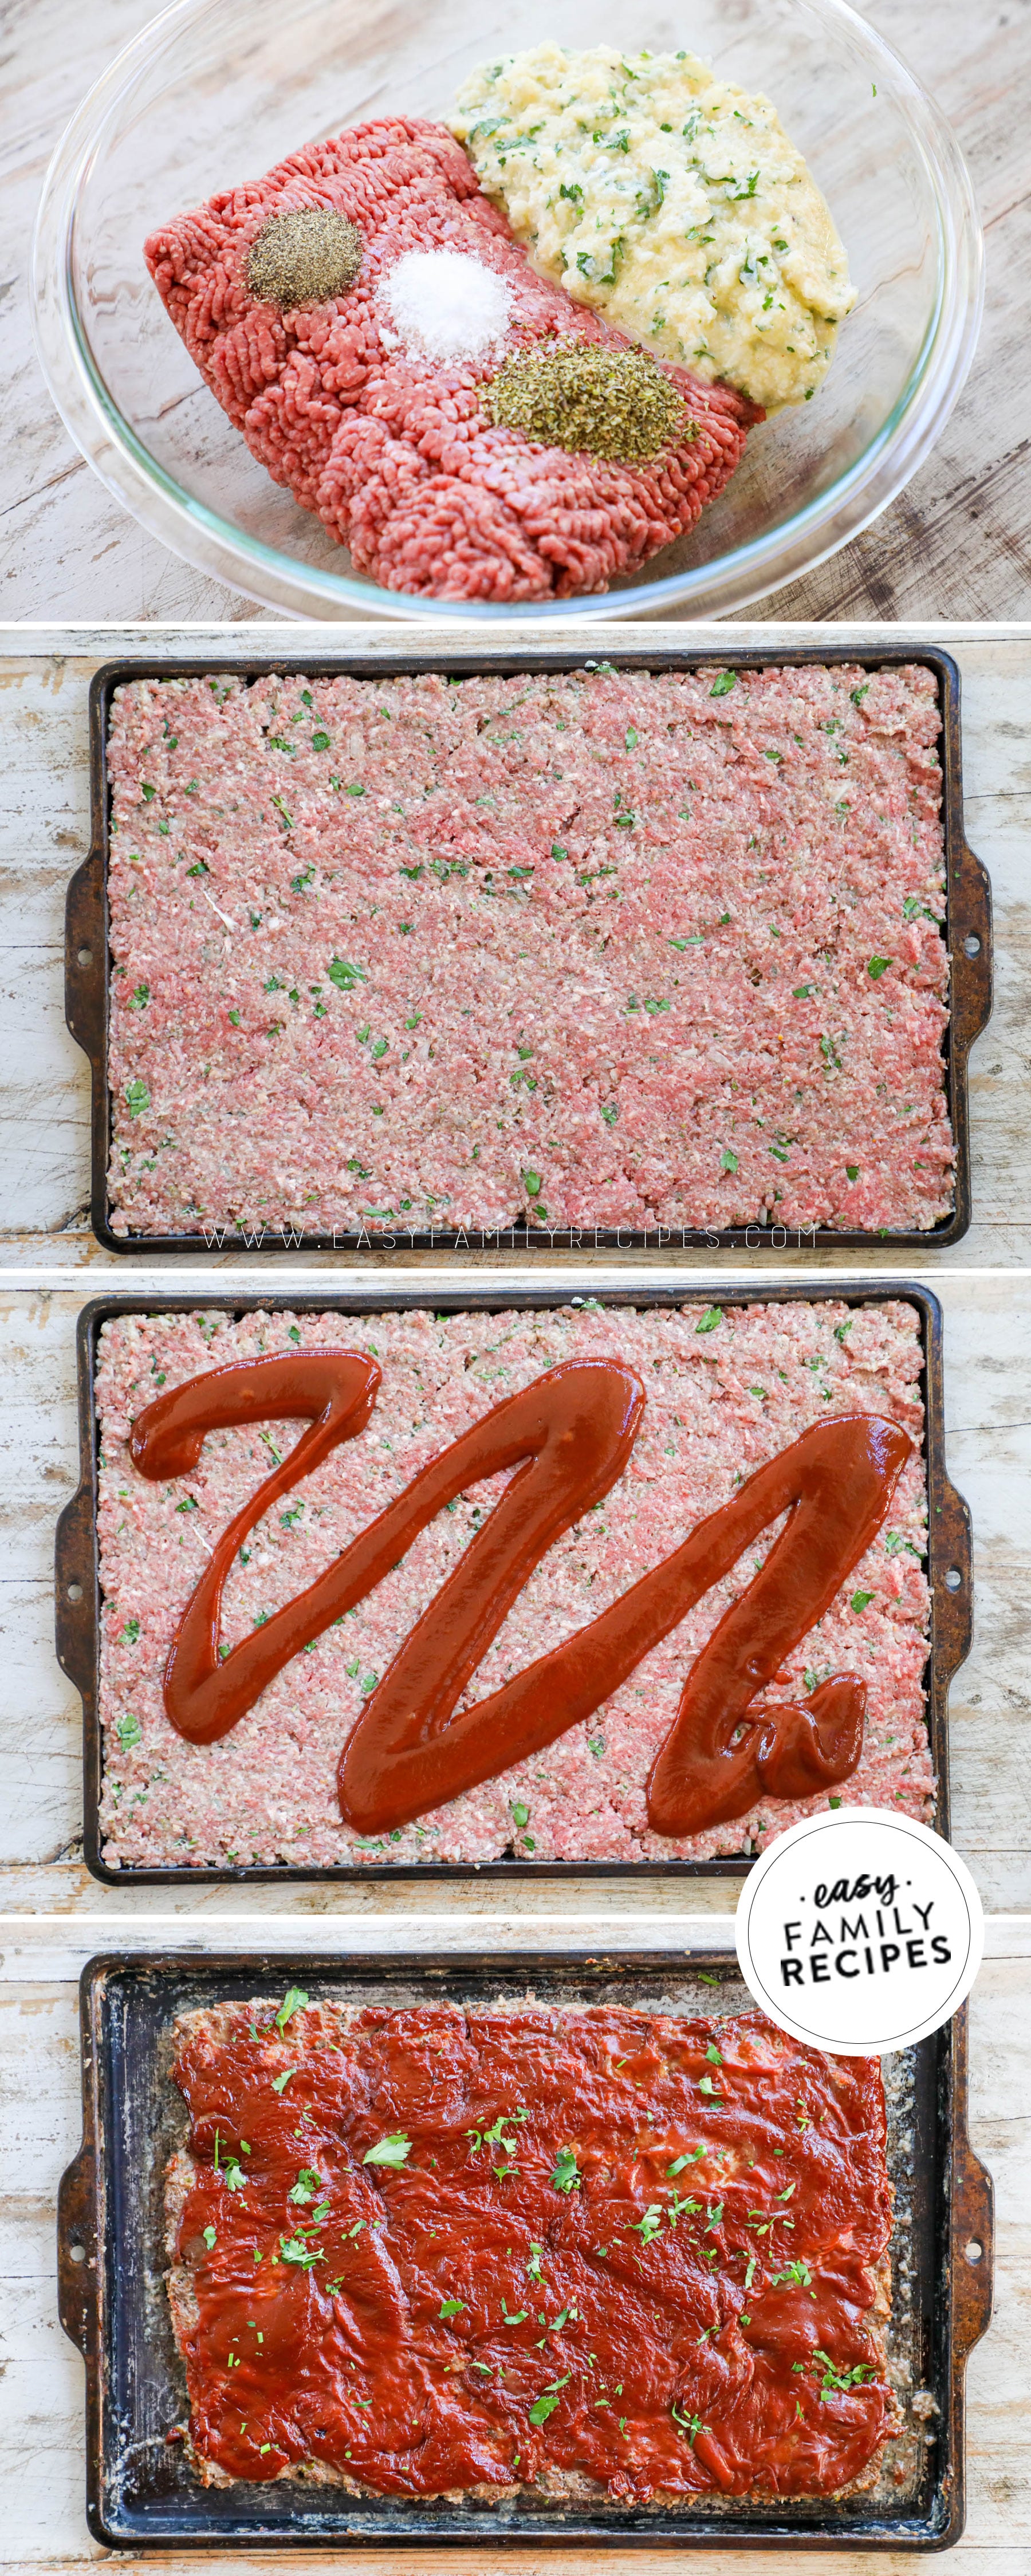 Process photos for how to make sheet pan meatloaf recipe- 1. Mix ground beef, bread crumbs, eggs, and seasonings. 2. Press into a sheet pan. 3. Cover with meatloaf sauce. 4. Bake until cooked through with the perfect thick delicious glaze topping.